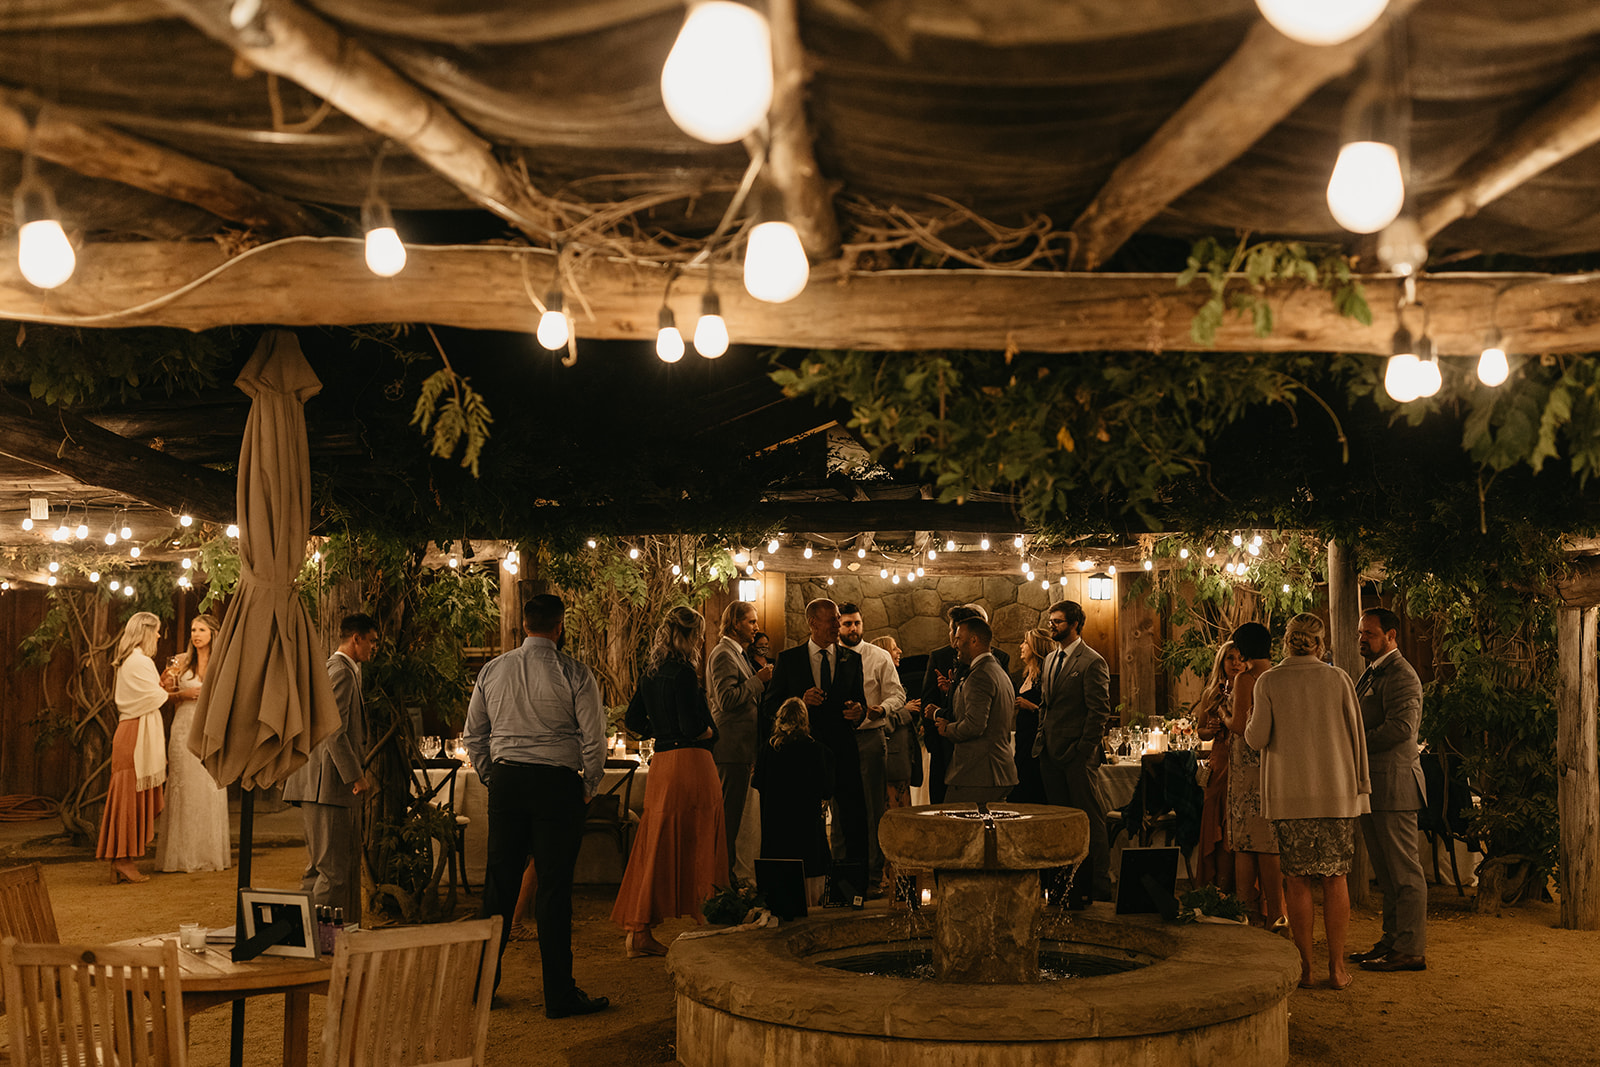 Small, intimate vineyard wedding reception with 20 guests at Roblar Winery